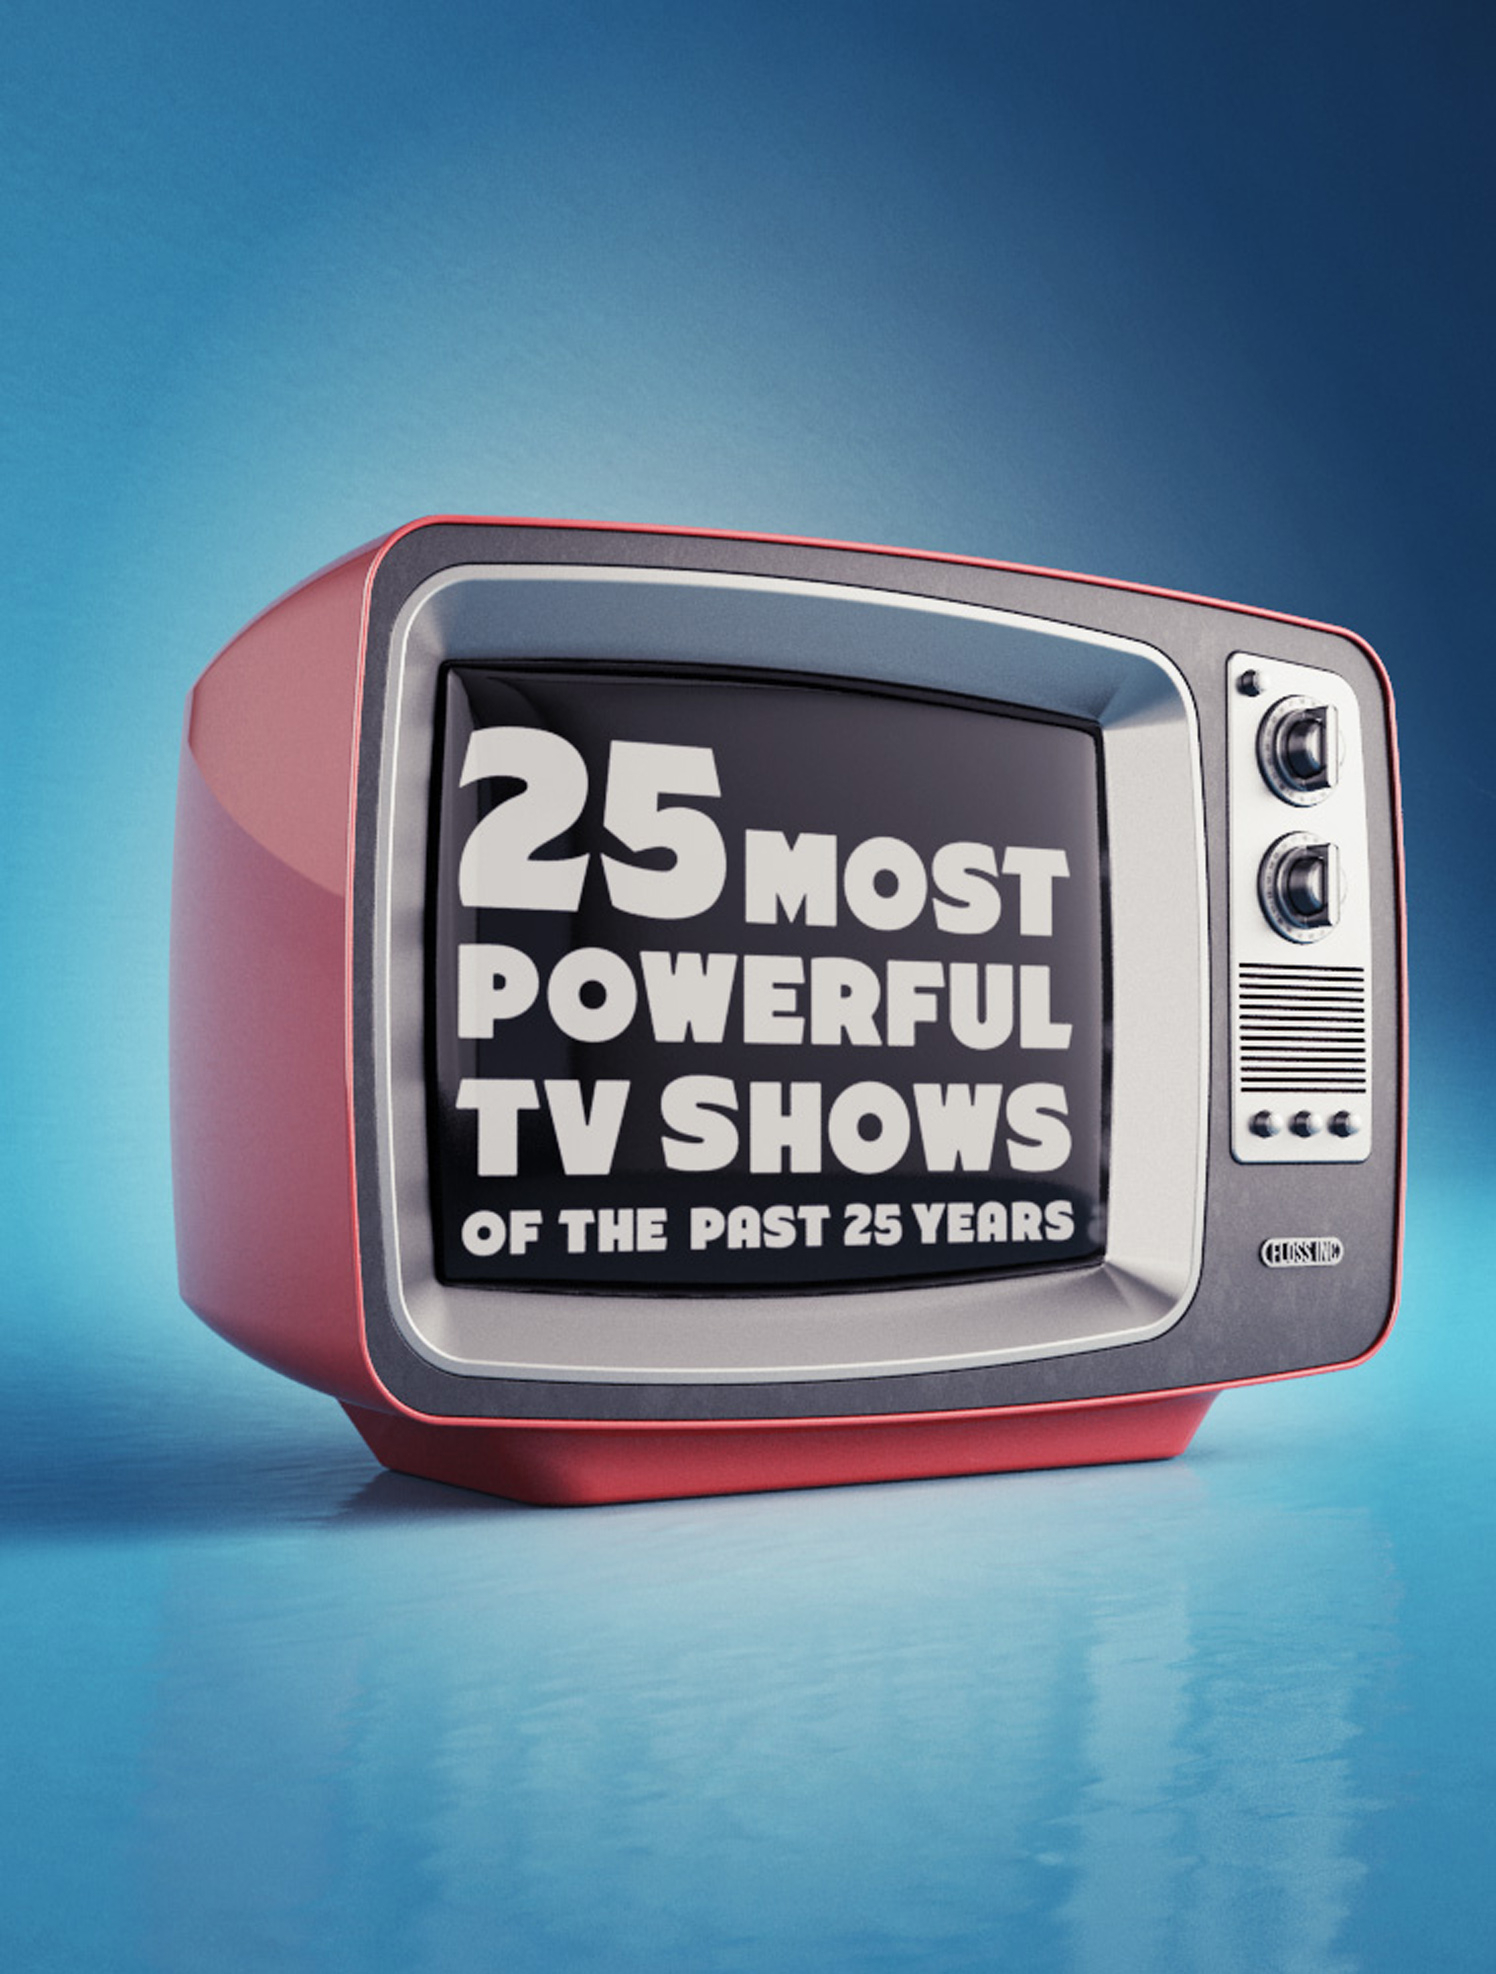 25 Most Powerful TV Shows